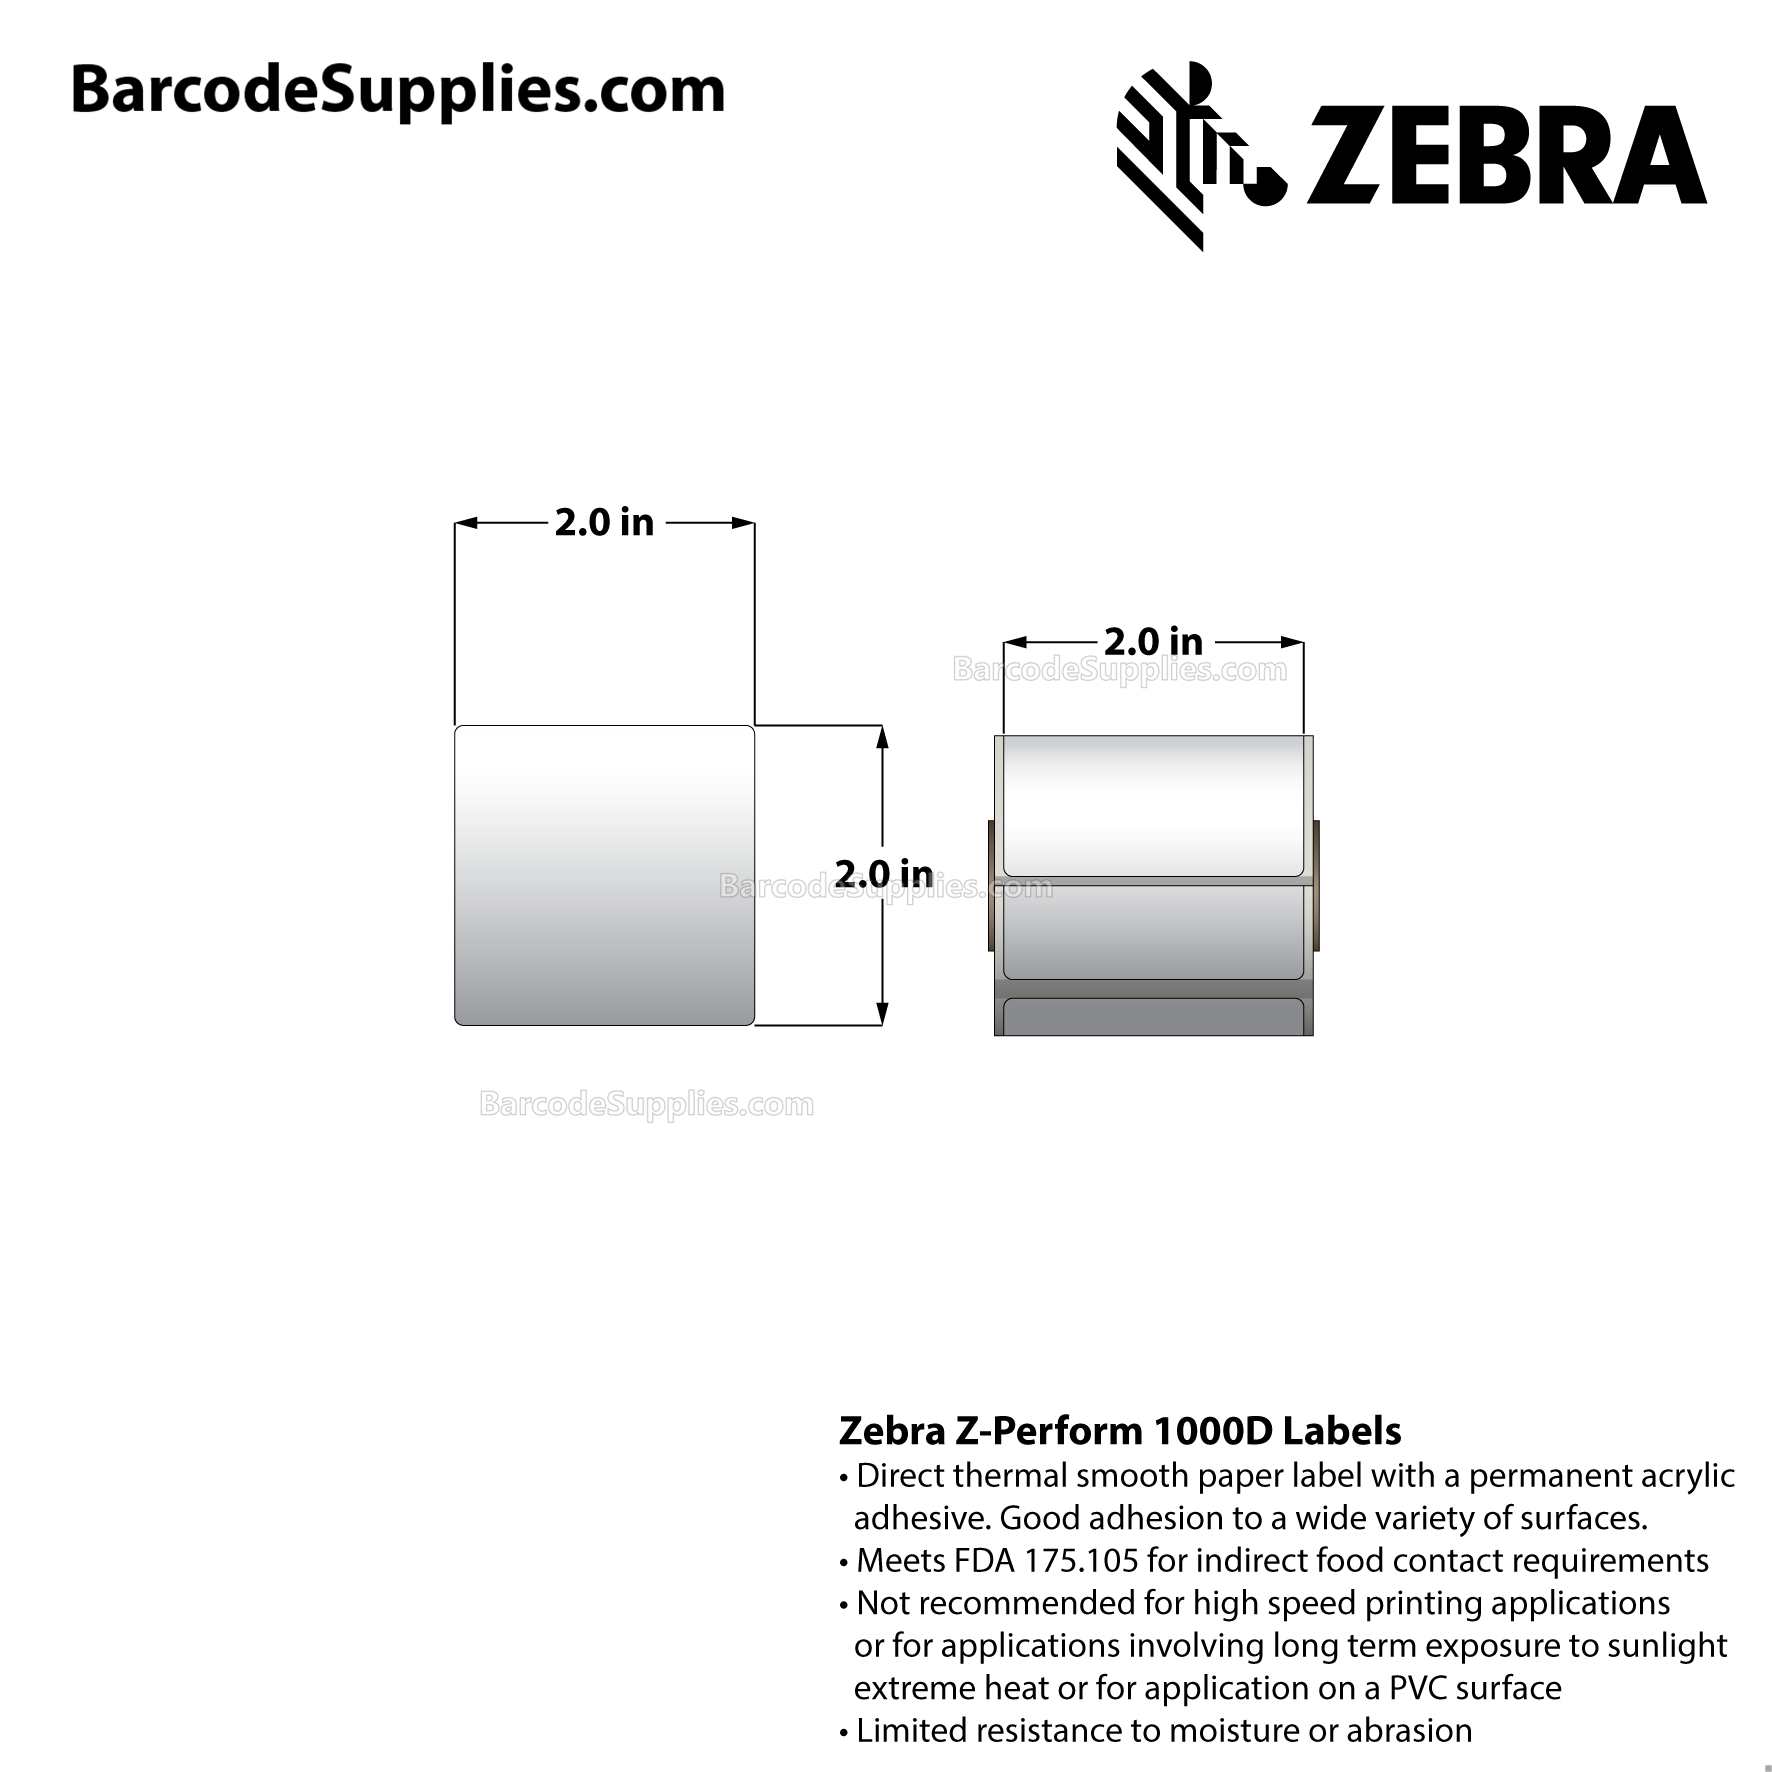 2 x 2 Direct Thermal White Z-Perform 1000D Labels With Permanent Adhesive - Black mark sensing - Not Perforated - 185 Labels Per Roll - Carton Of 36 Rolls - 6660 Labels Total - MPN: LD-R7AO5B